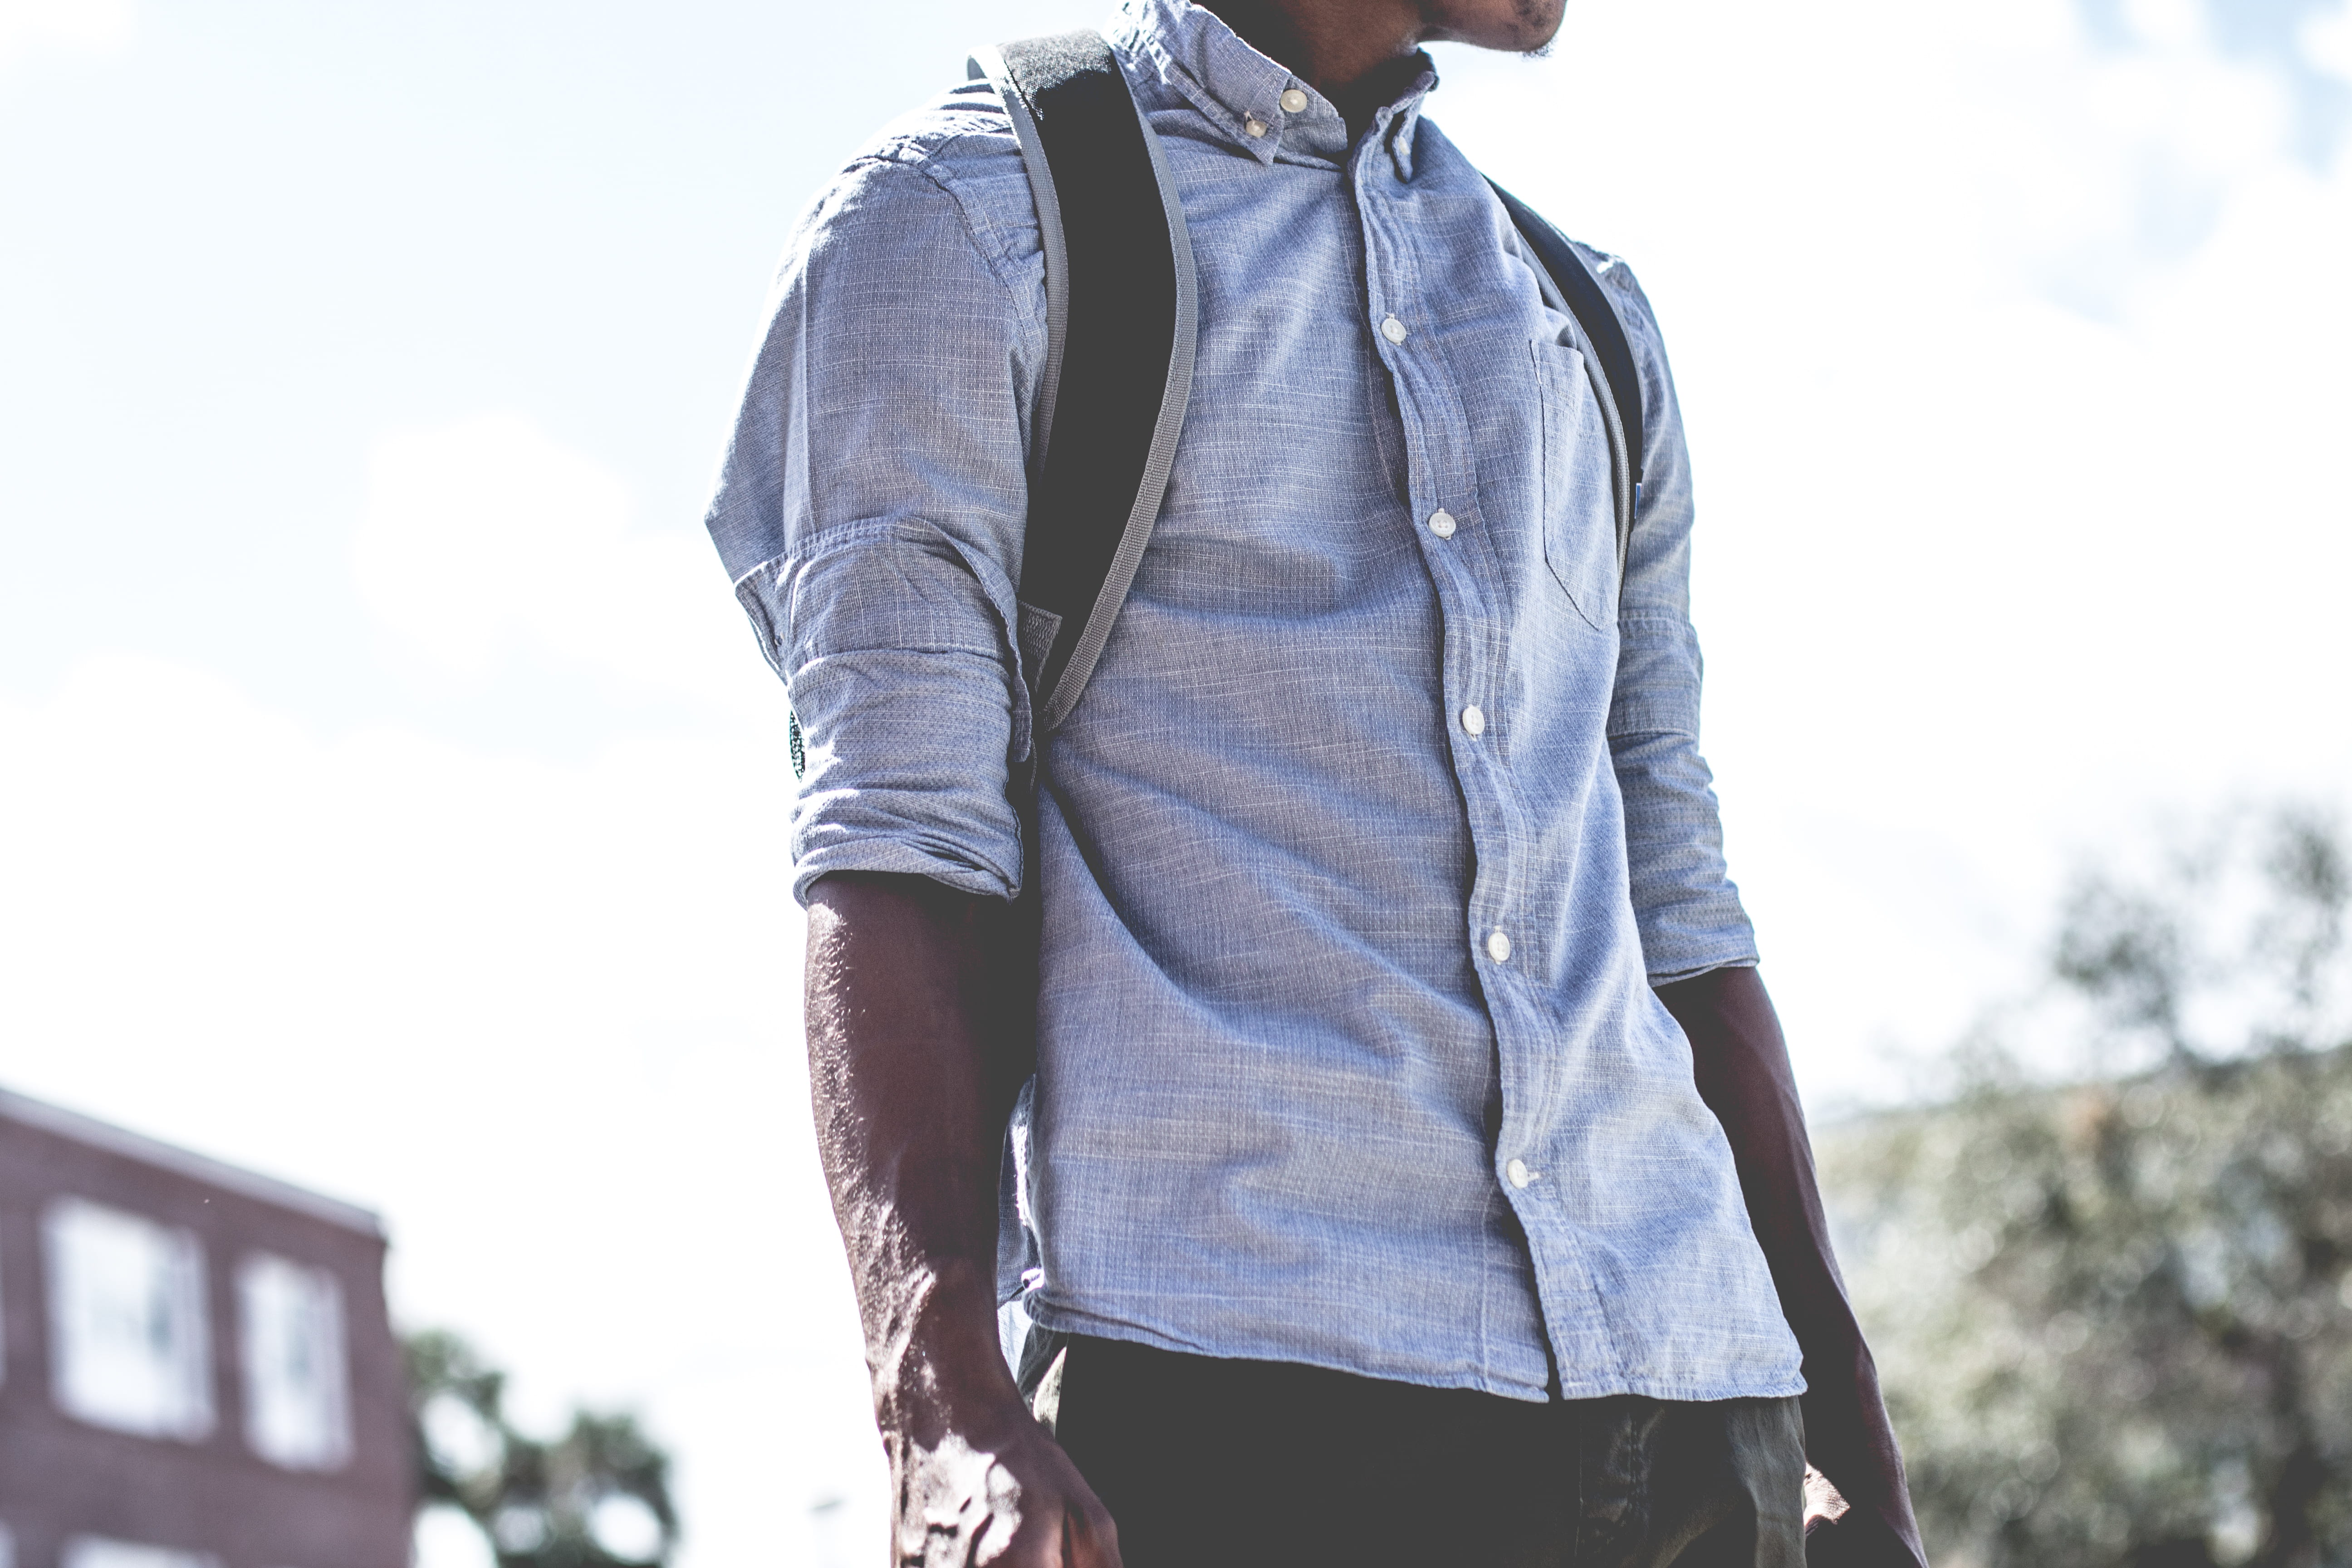 man standing carrying backpack, man wearing gray dress shirt and black backpack outdoors